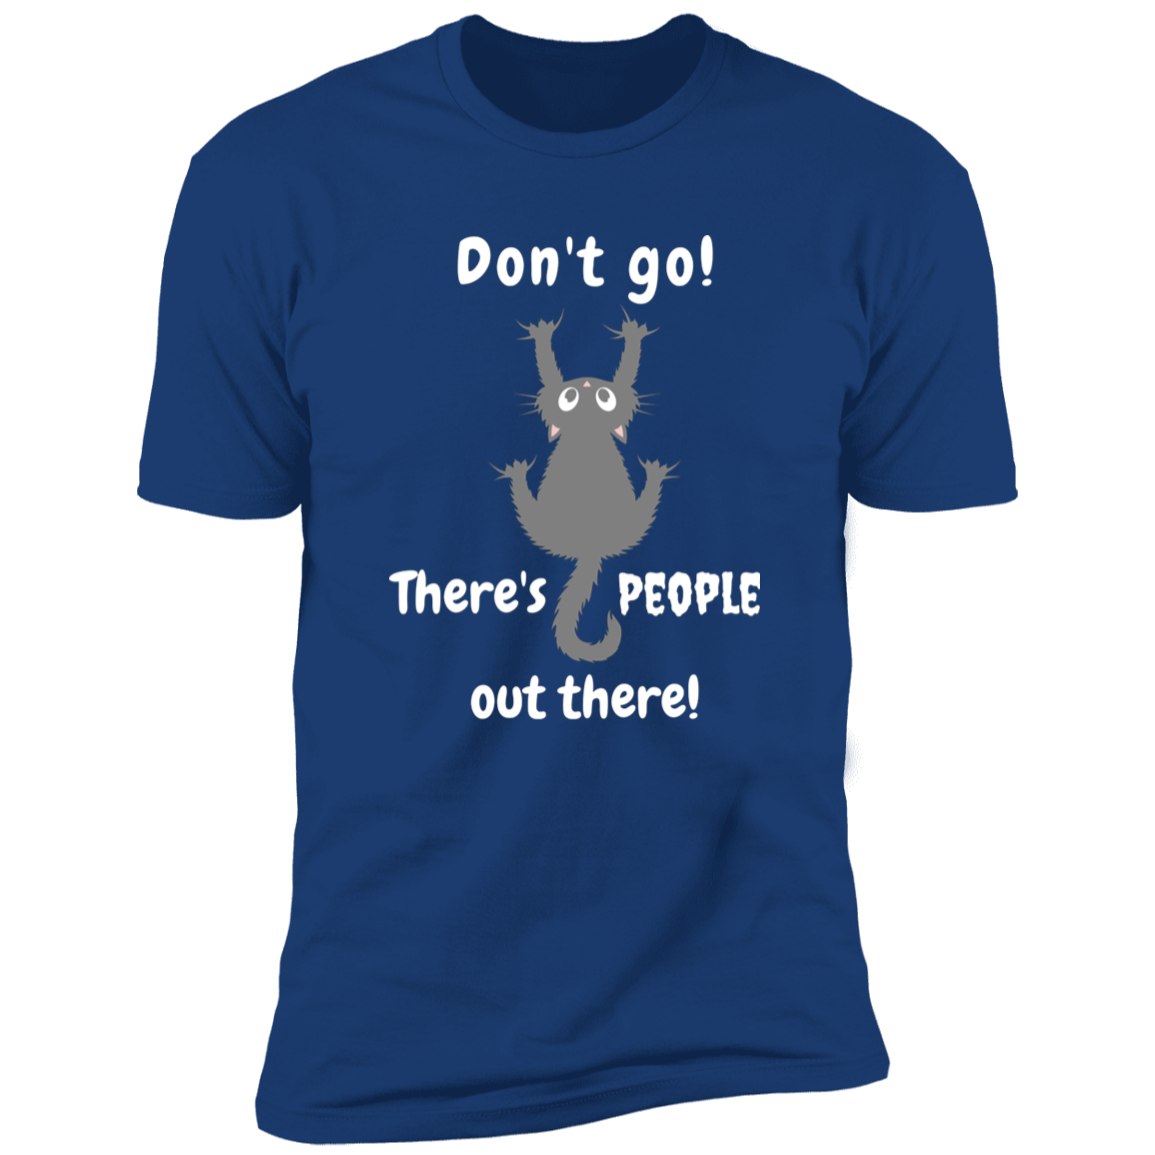 Don't Go! There are People Out there Shirt, funny cat shirt for humans, cat mom and cat dad shirt, in royal blue